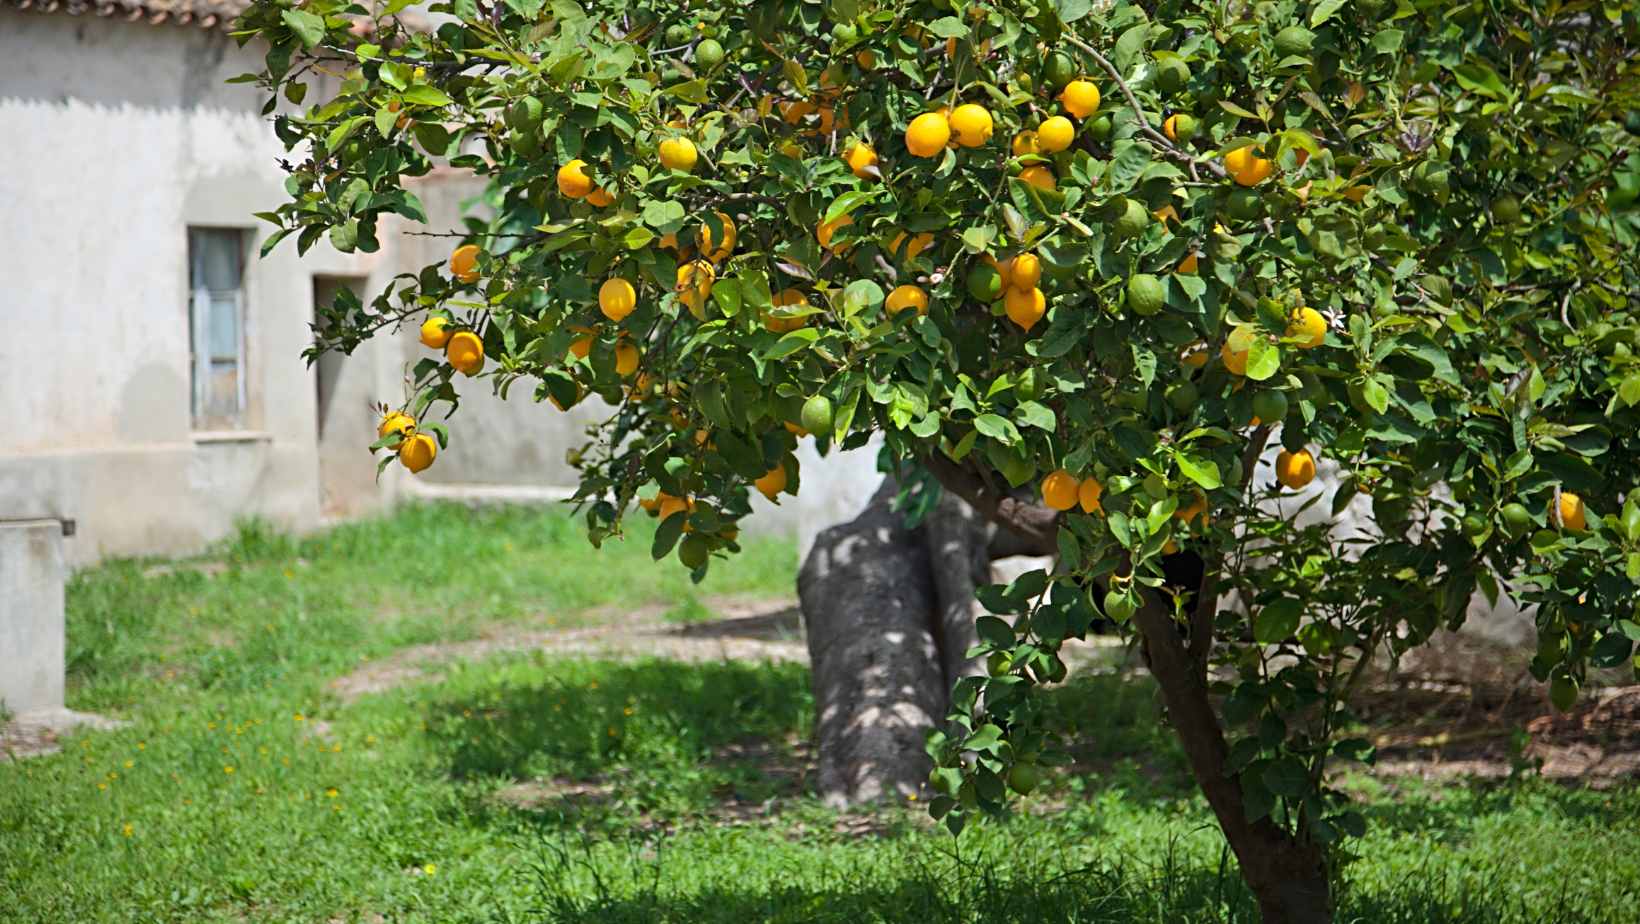 To Replant a Lemon Tree, Dig a Hole That is Twice The Width of The Tree’s Root Ball.